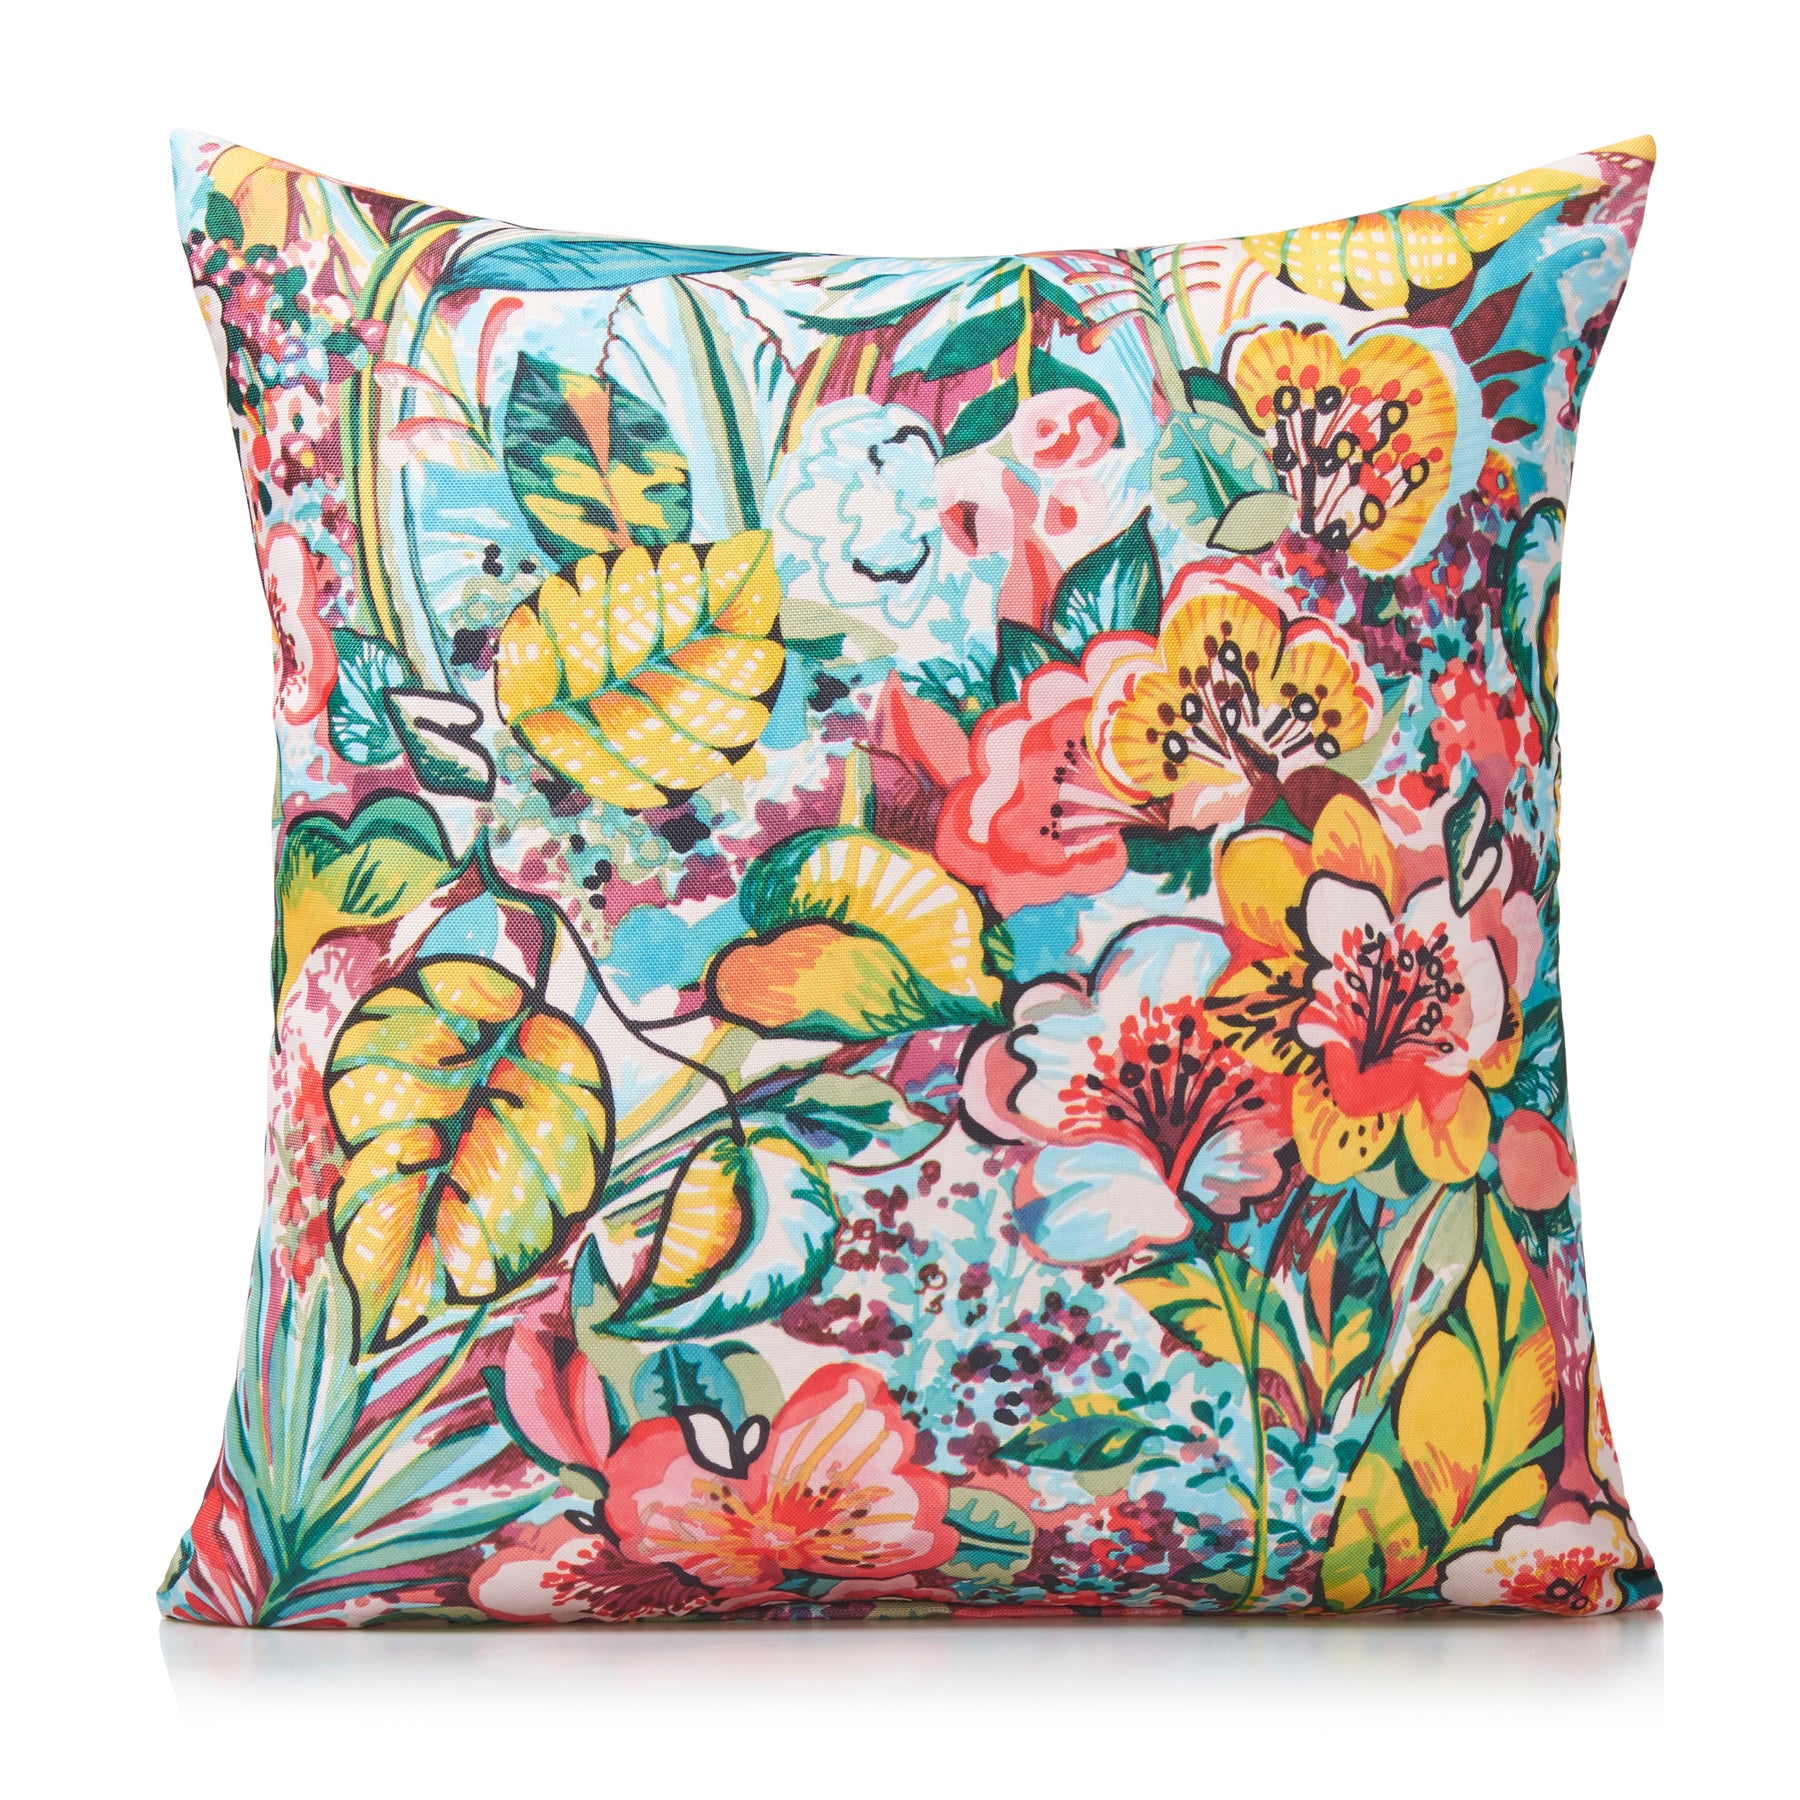 Paradiso Water Resistant Outdoor Filled Cushion 46cm x 46cm Multi